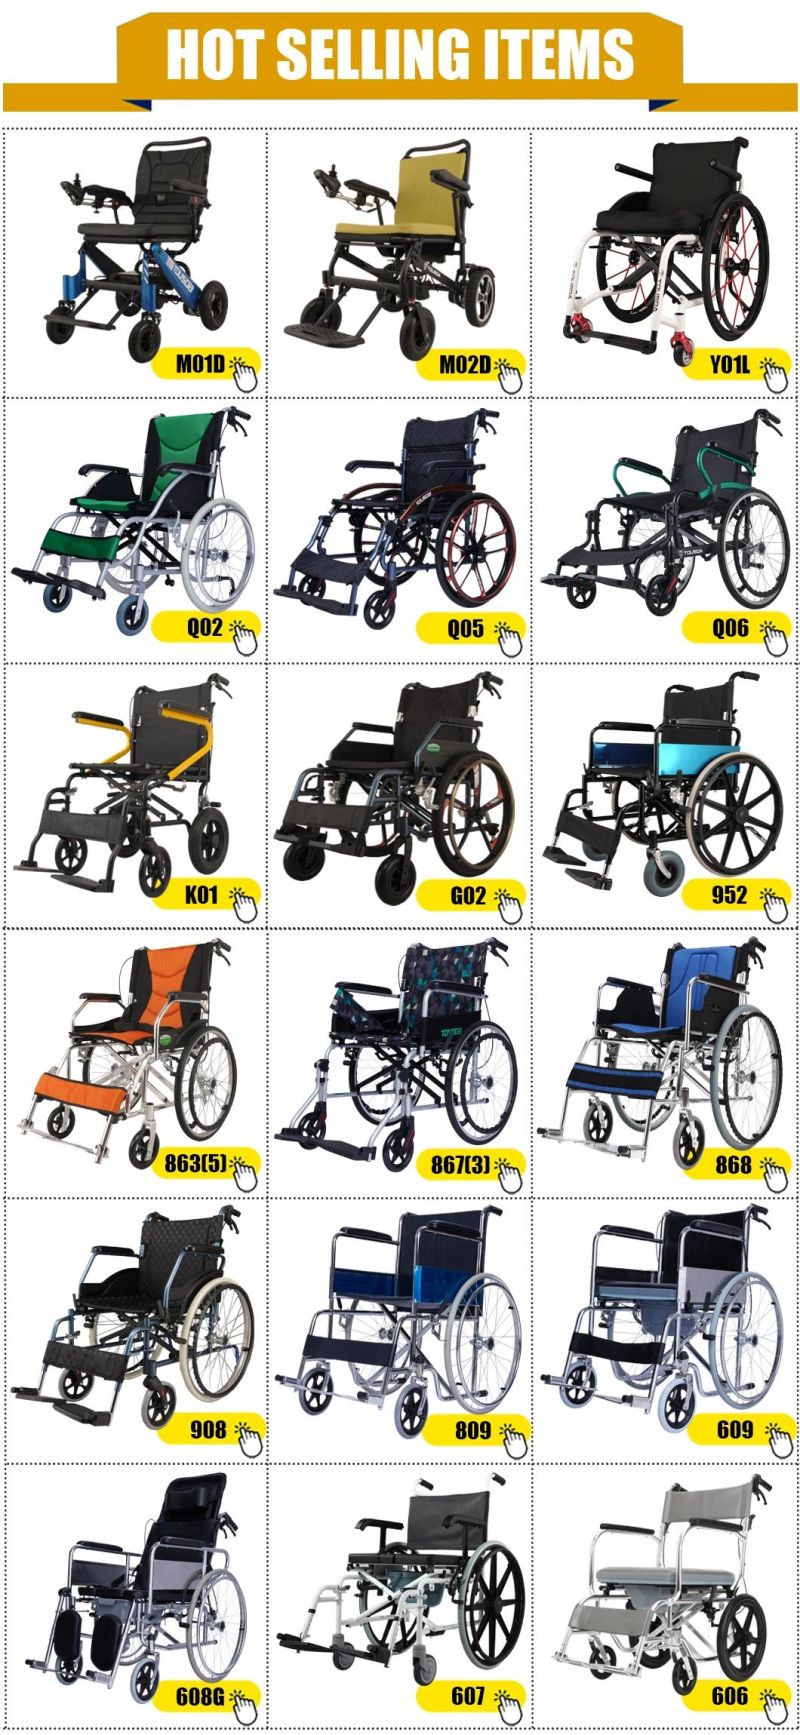 New Physical Therapy Rehabilitation Equipment Healthcare Home Health Care Heavy Duty Durable Strong Aluminum Folding Manual Power Electric Wheelchair